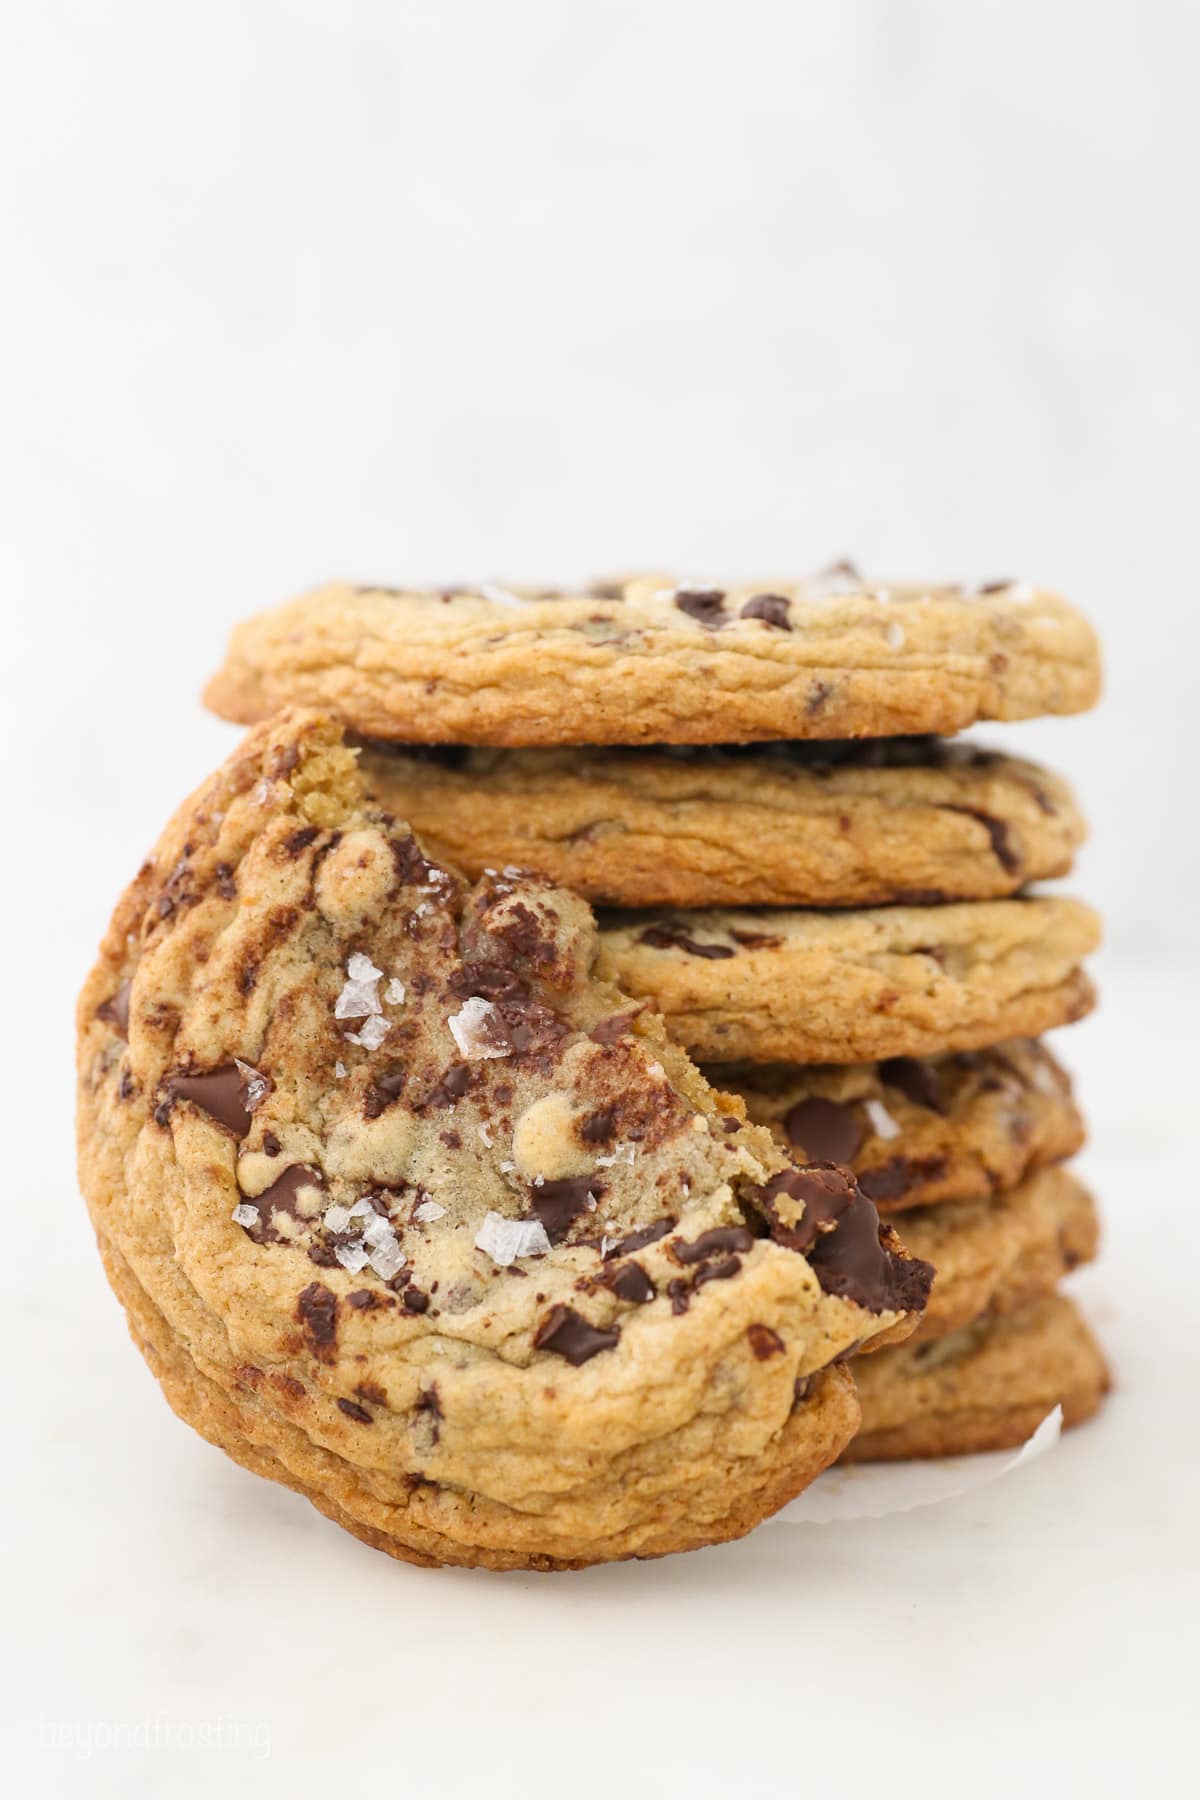 One half of a giant chocolate chip cookie leaning against a stack of cookies on a white surface.